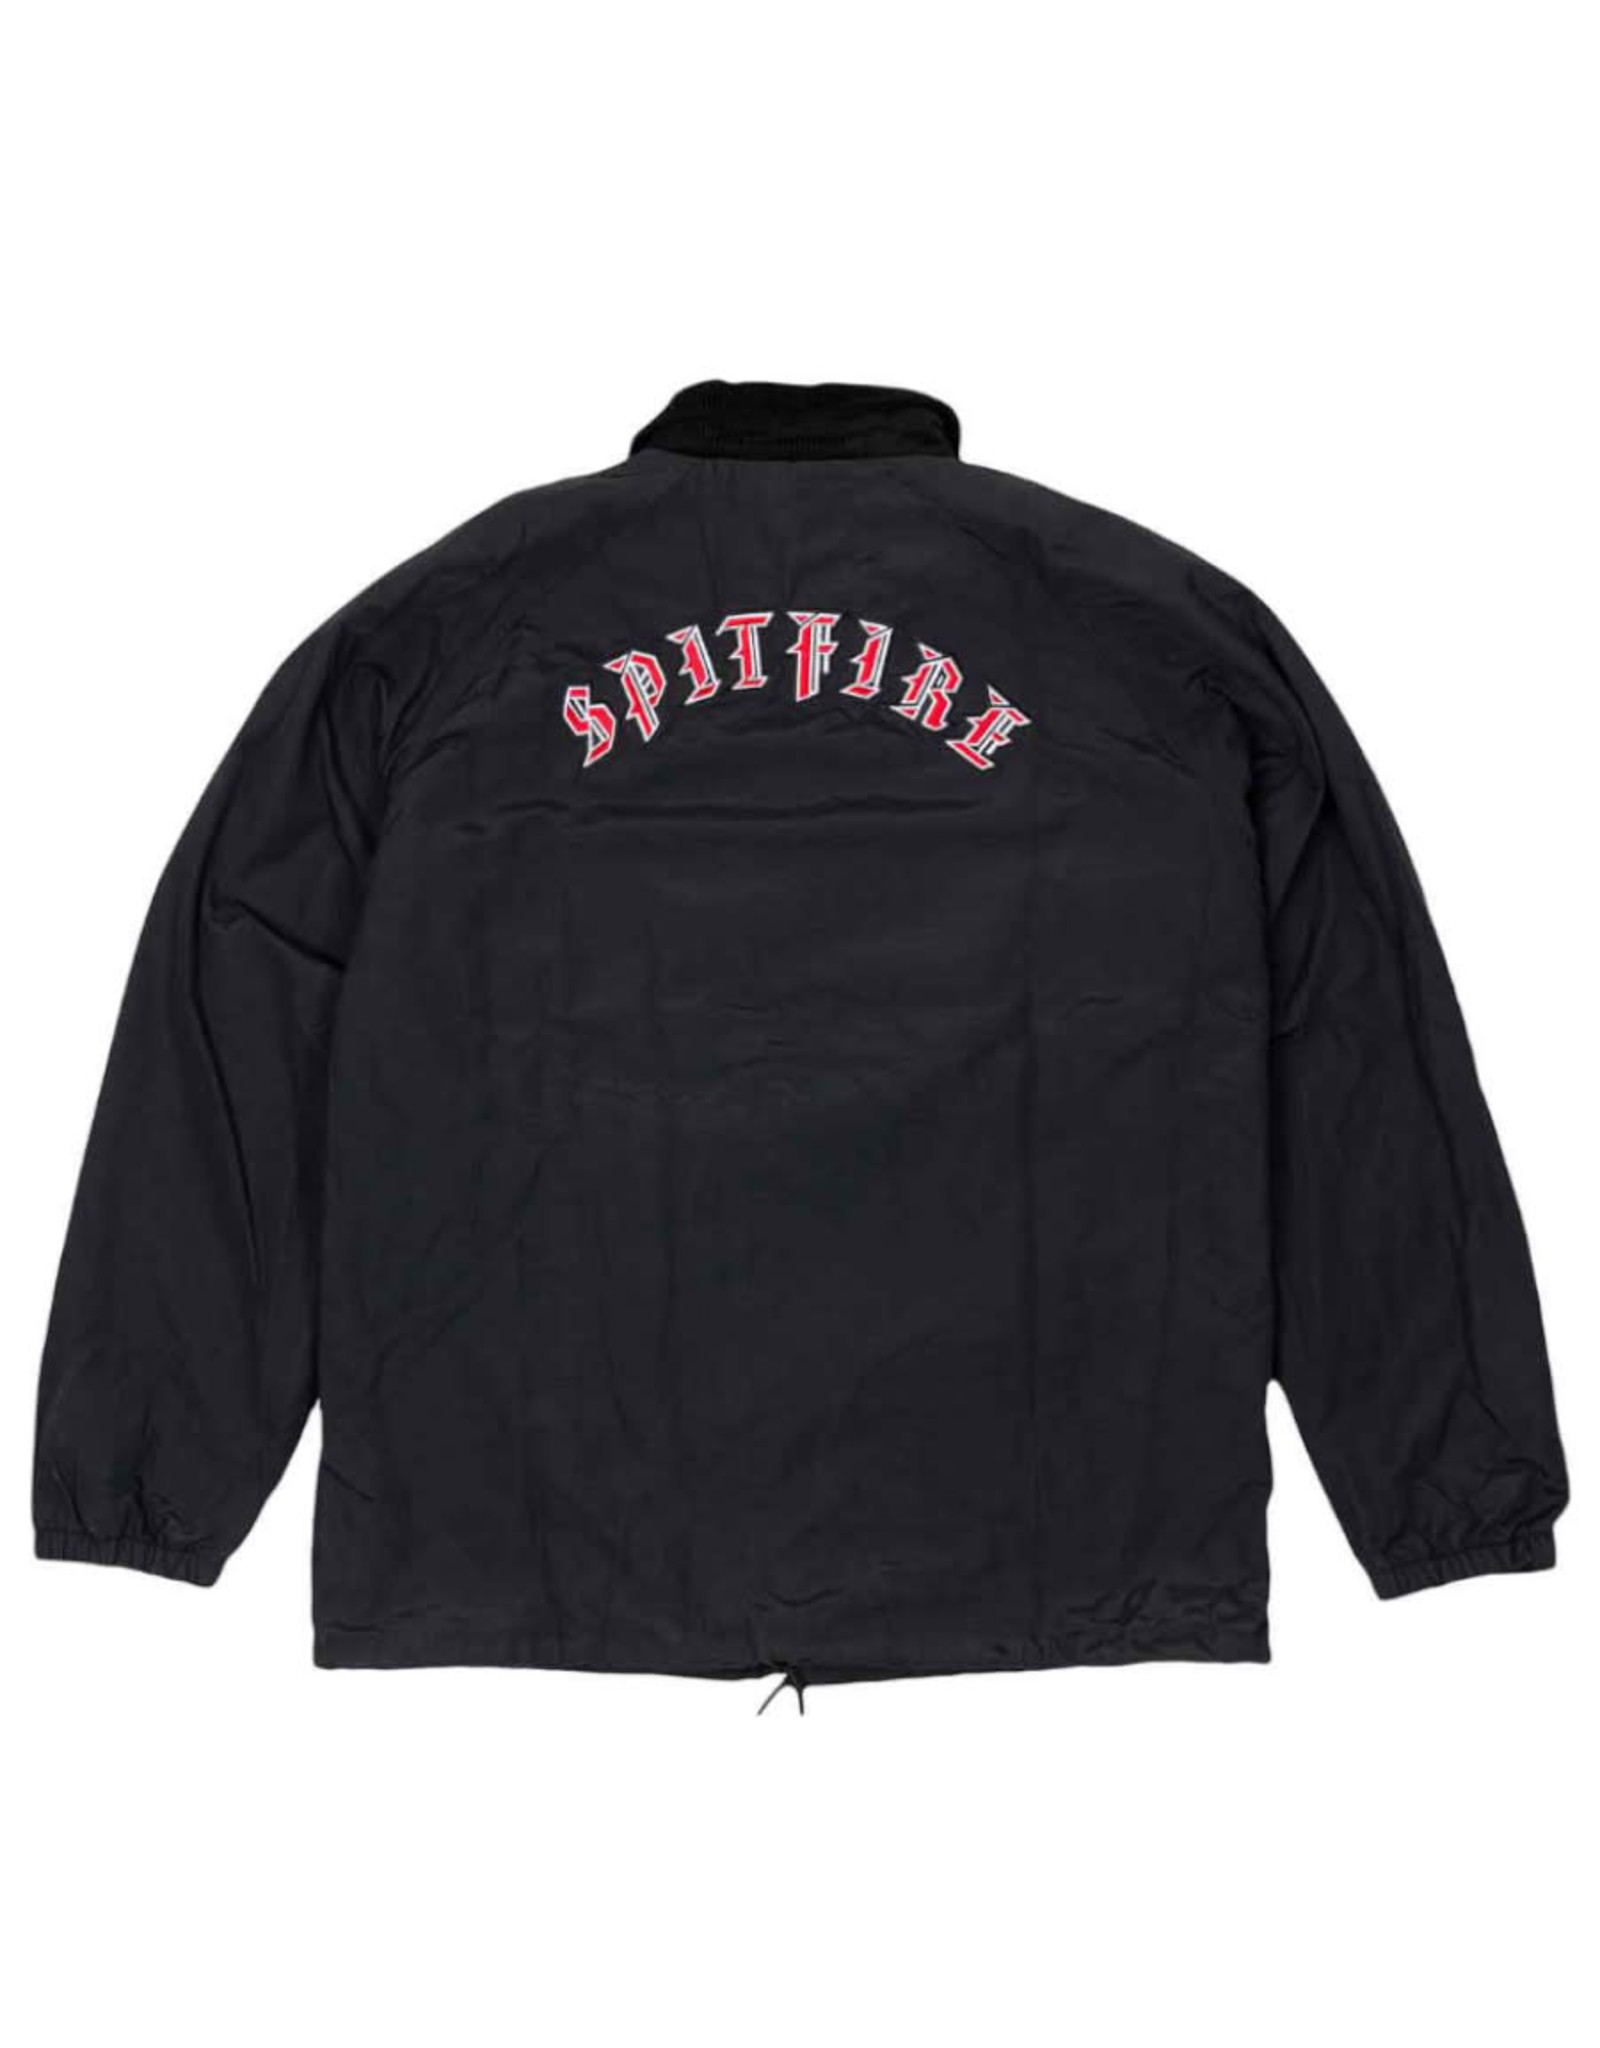 Spitfire Spitfire Jacket Old E Embroidery Button (Black/Red/White)